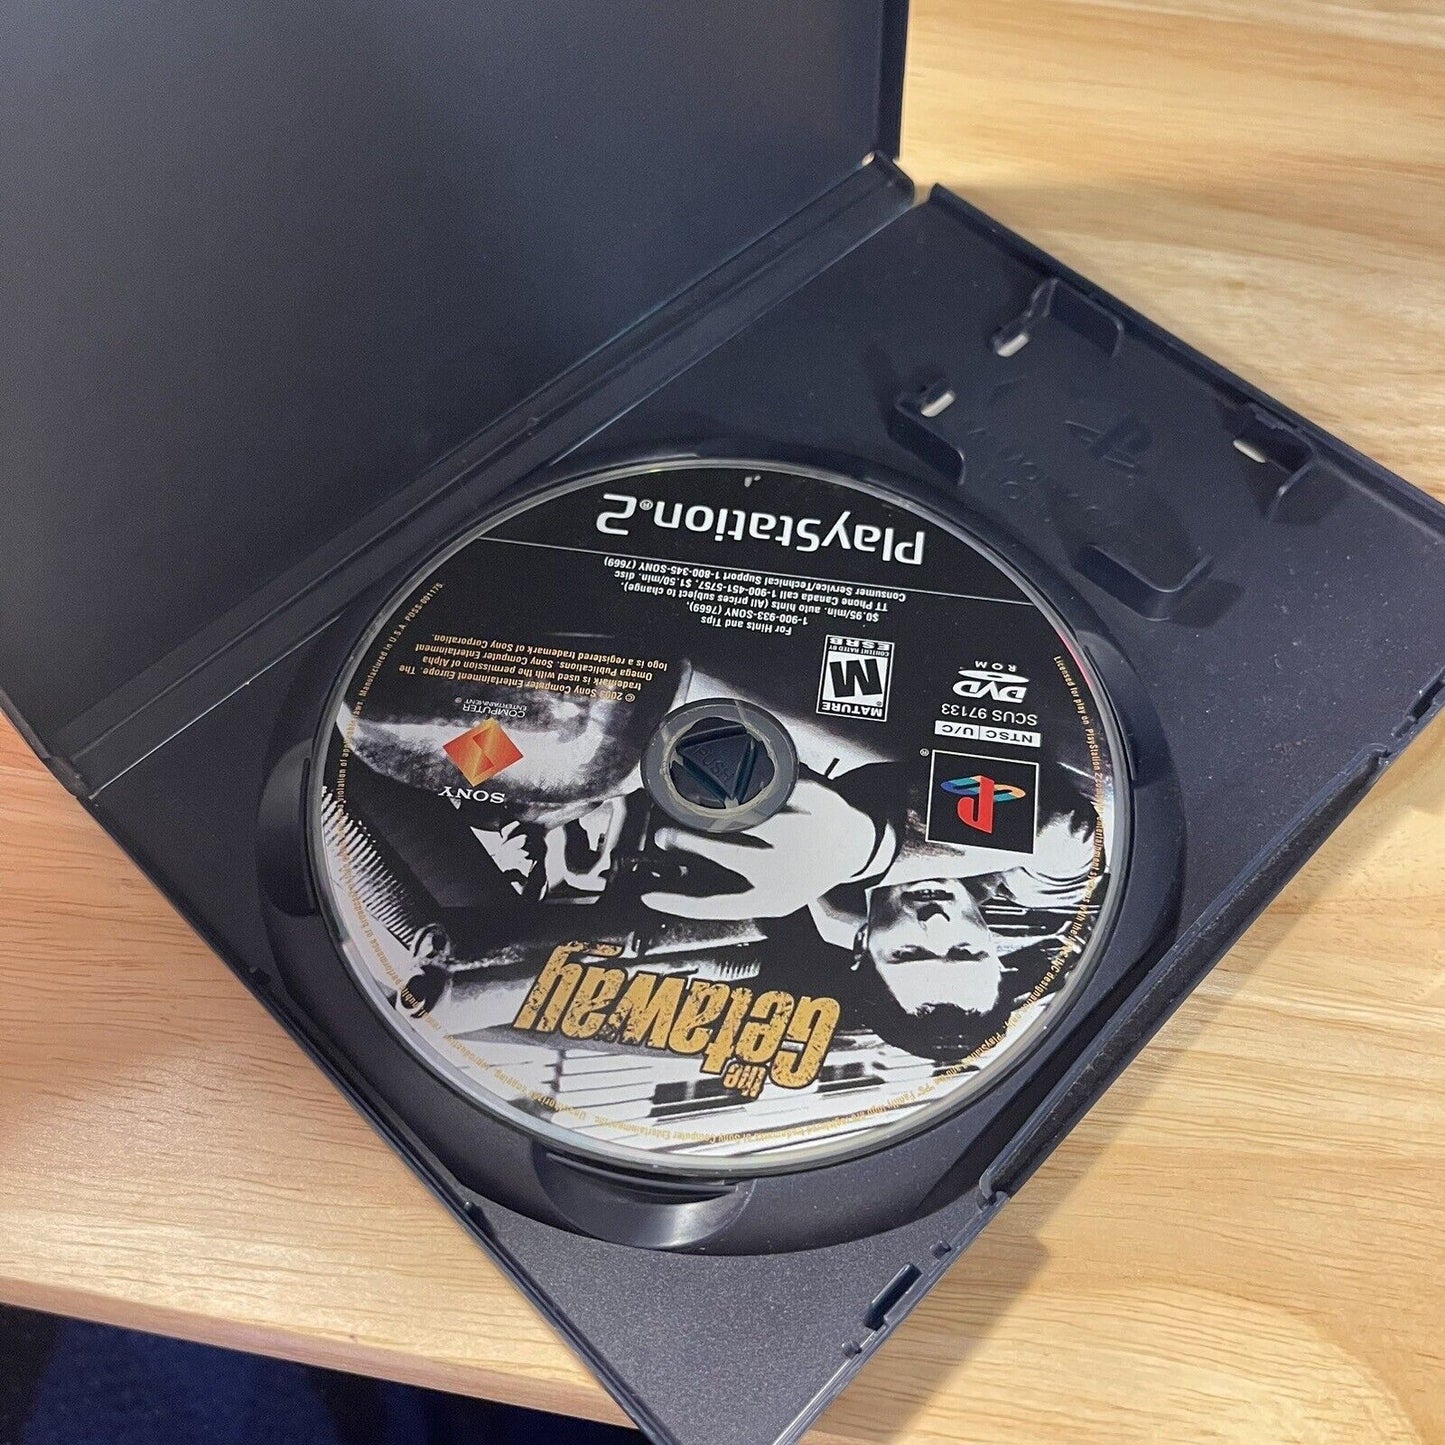 The Getaway (Sony PlayStation 2, 2003) PS2 Game Tested and Working